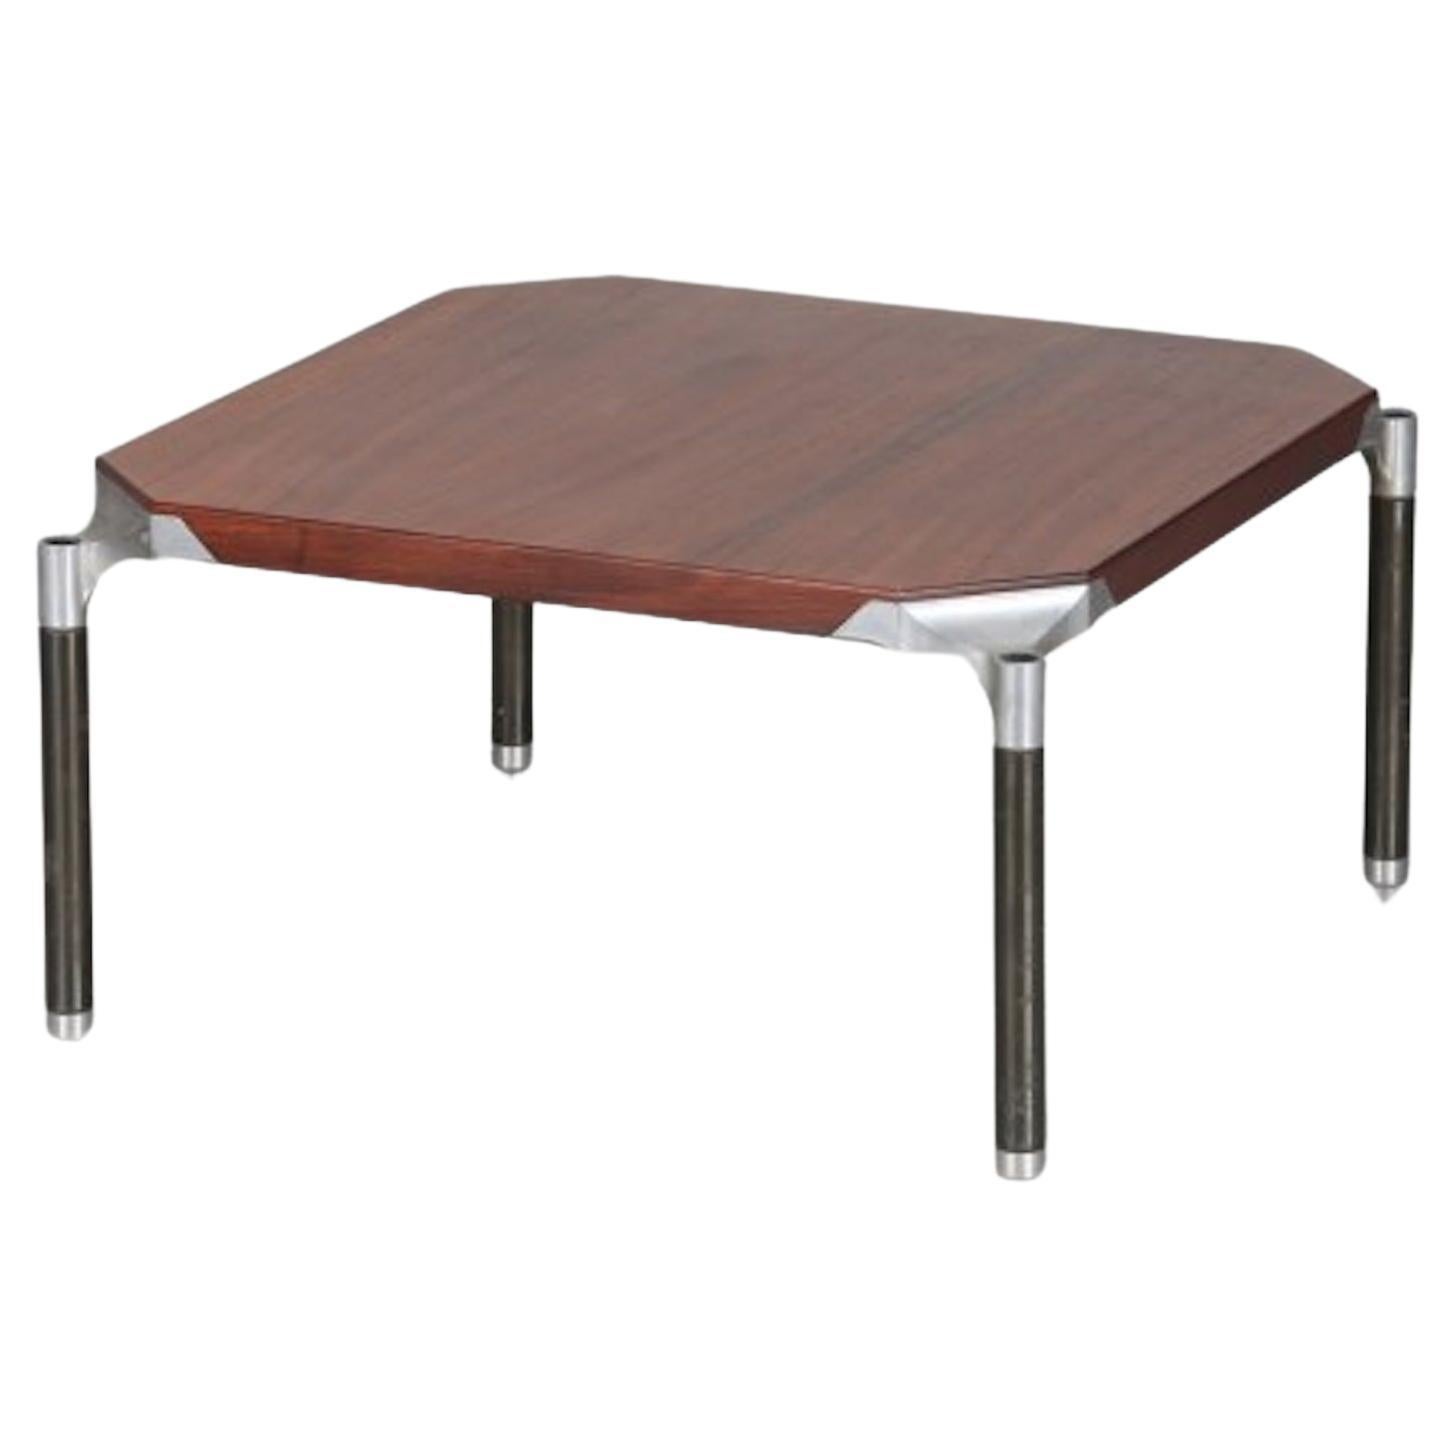 Wood and metal coffee table by Ico Parisi for MIM, Rome, (Two Available)